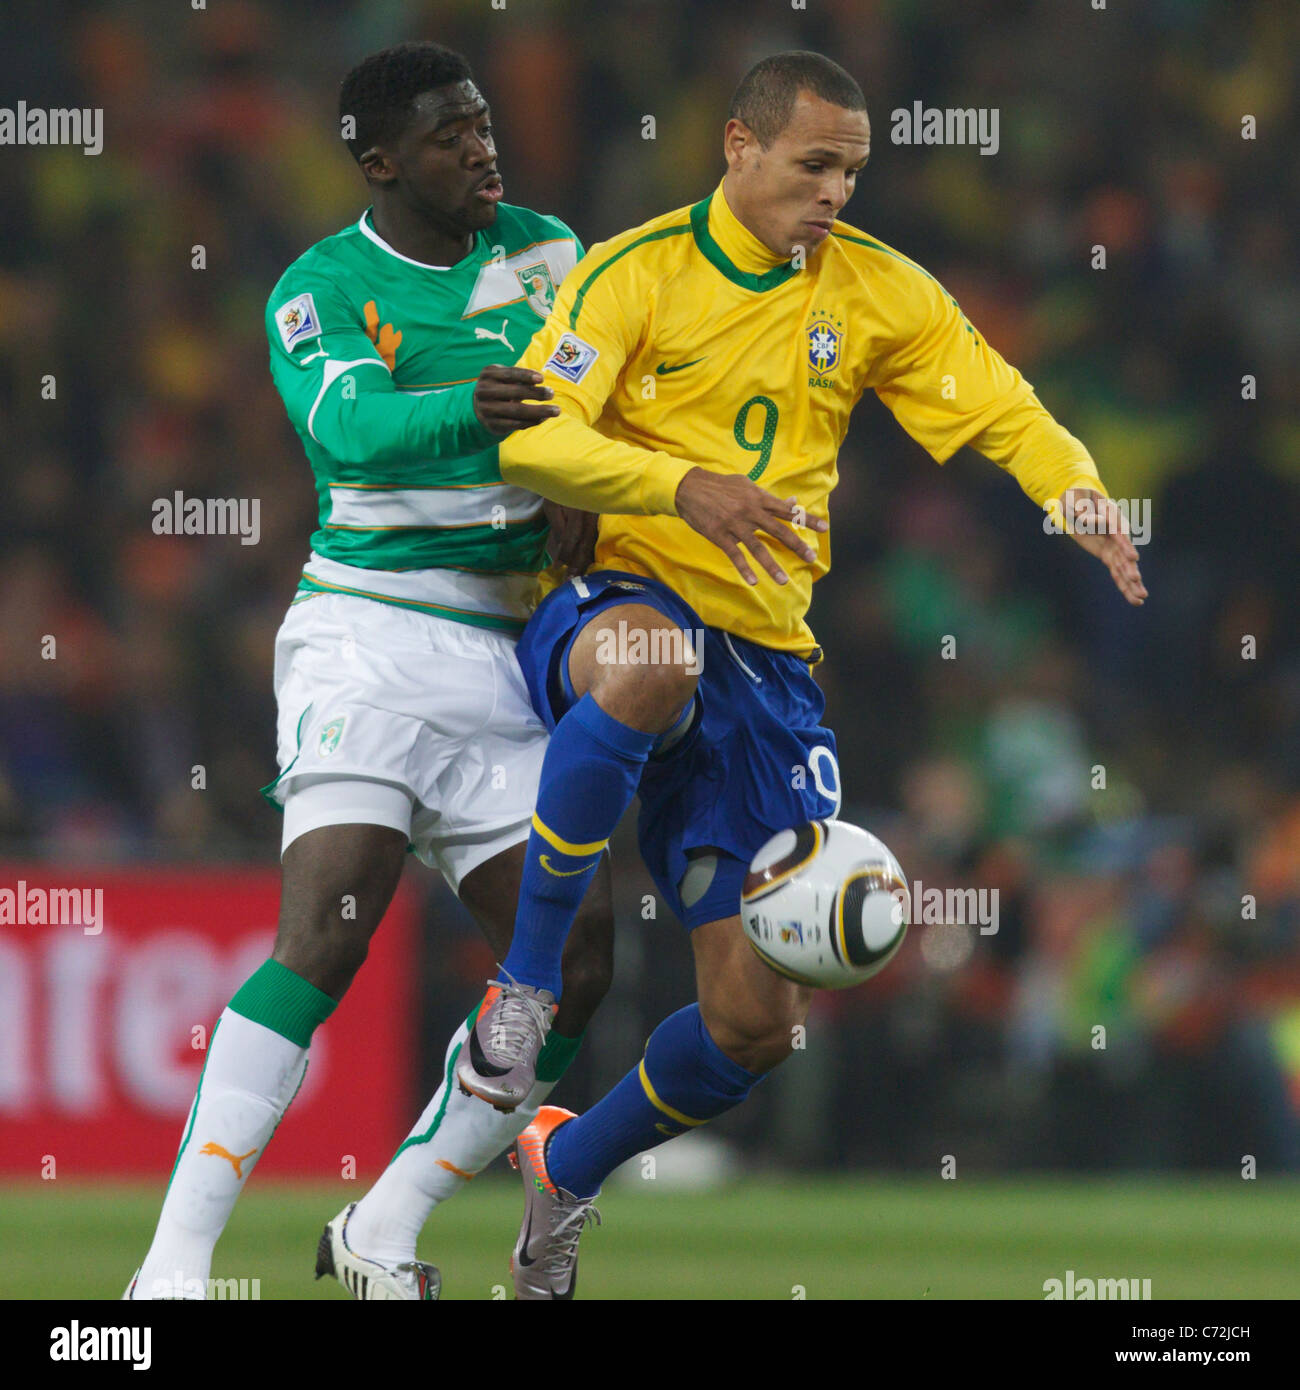 Kolo Toure of Côte d'Ivoire (l) pressures Luis Fabiano of Brazil (r) during a 2010 FIFA World Cup soccer match June 20, 2010. Stock Photo